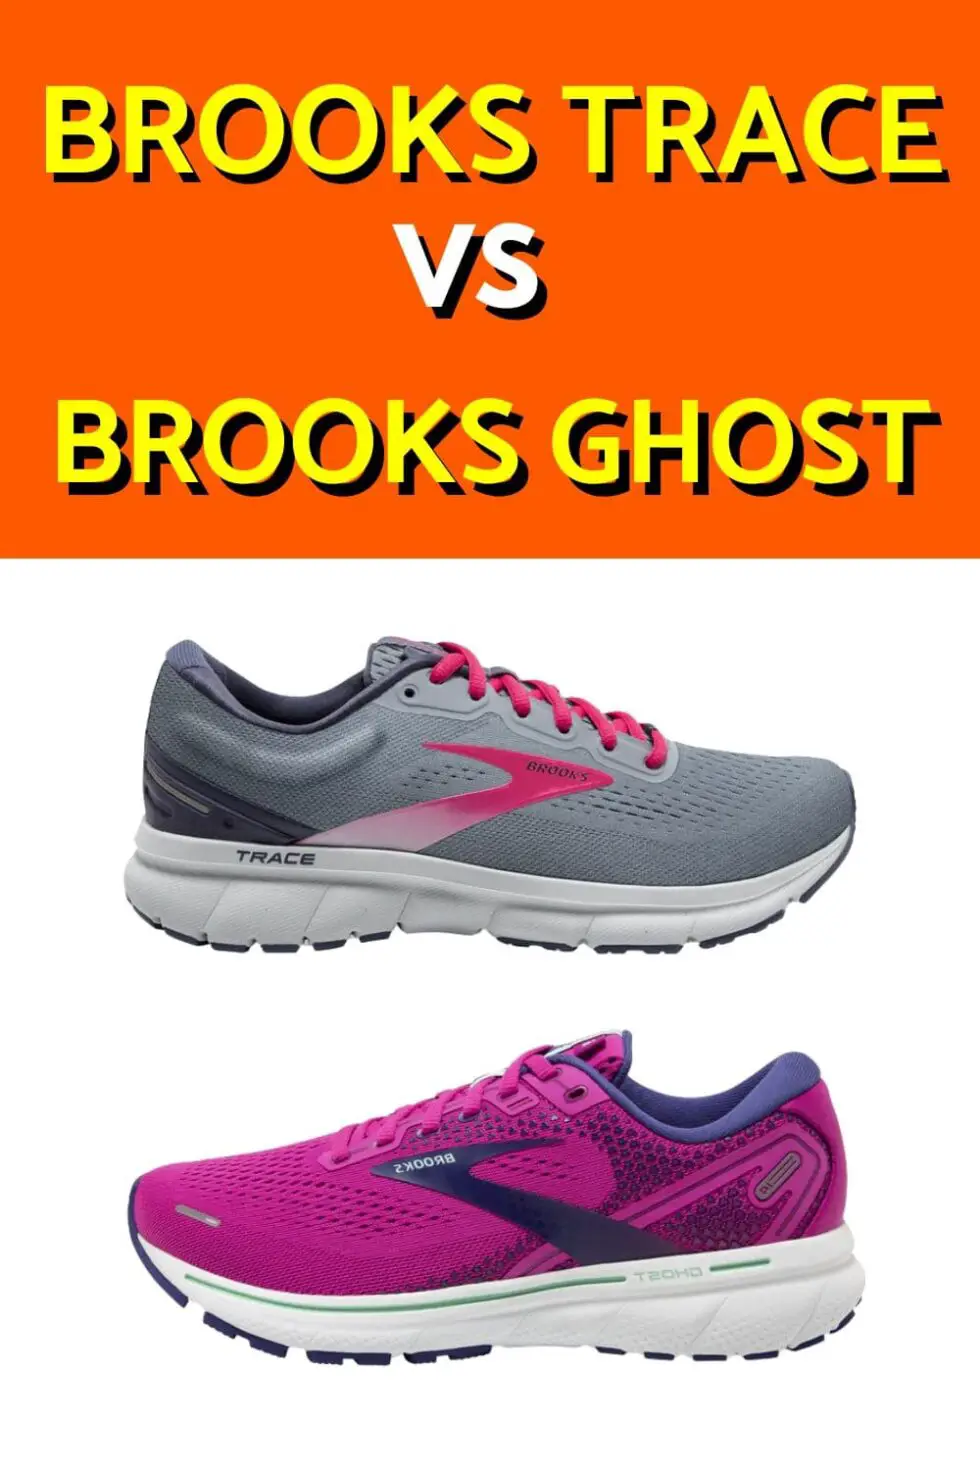 Brooks Ghost Vs Trace: Which One Is The Best For You? [2021] | Best ...